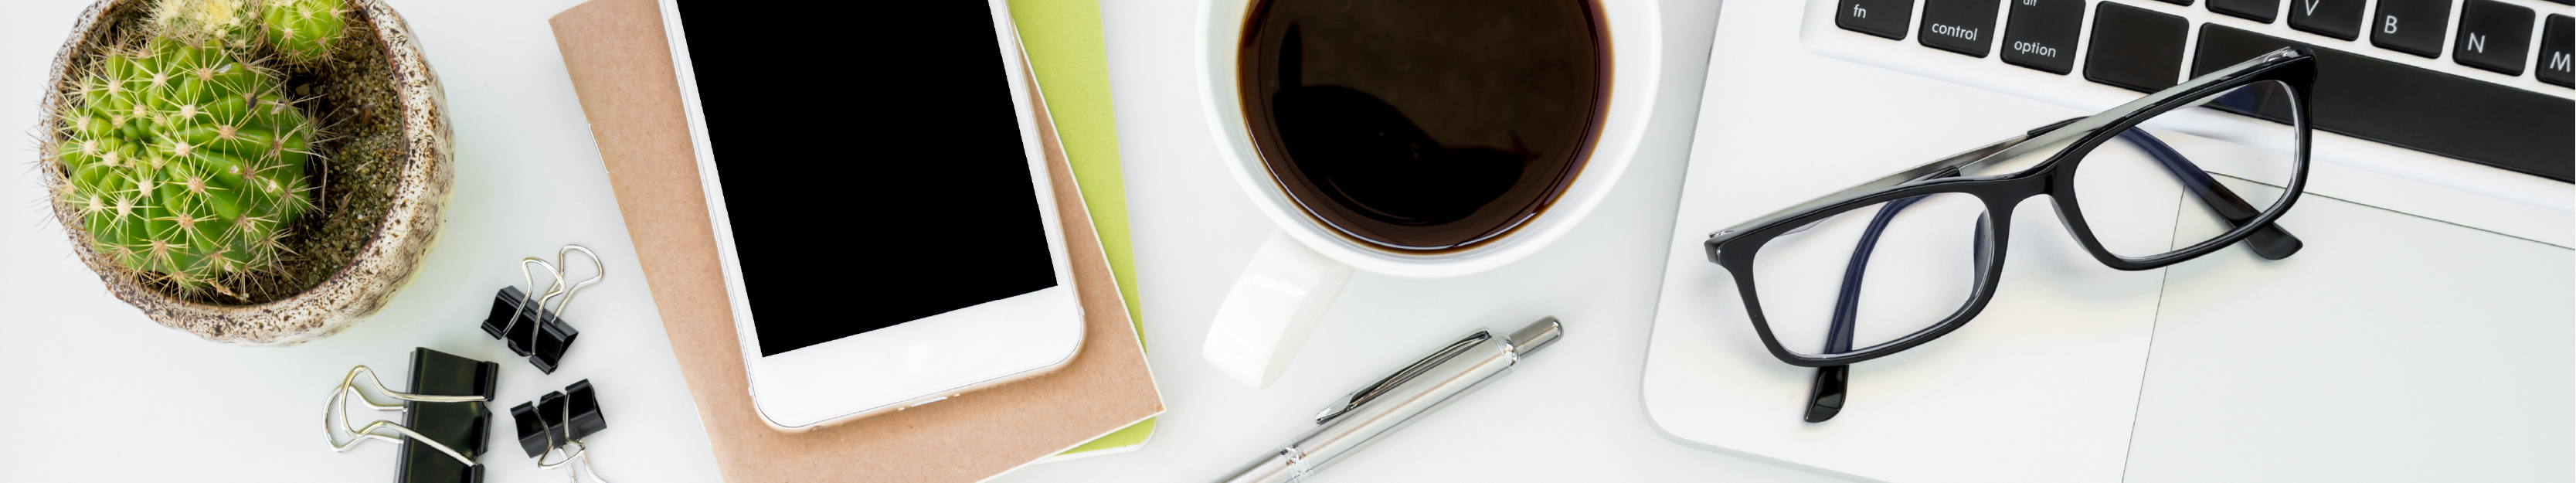 Image of glasses, a phone, a pen, a succulent and a cup of coffee on a desk with a laptop